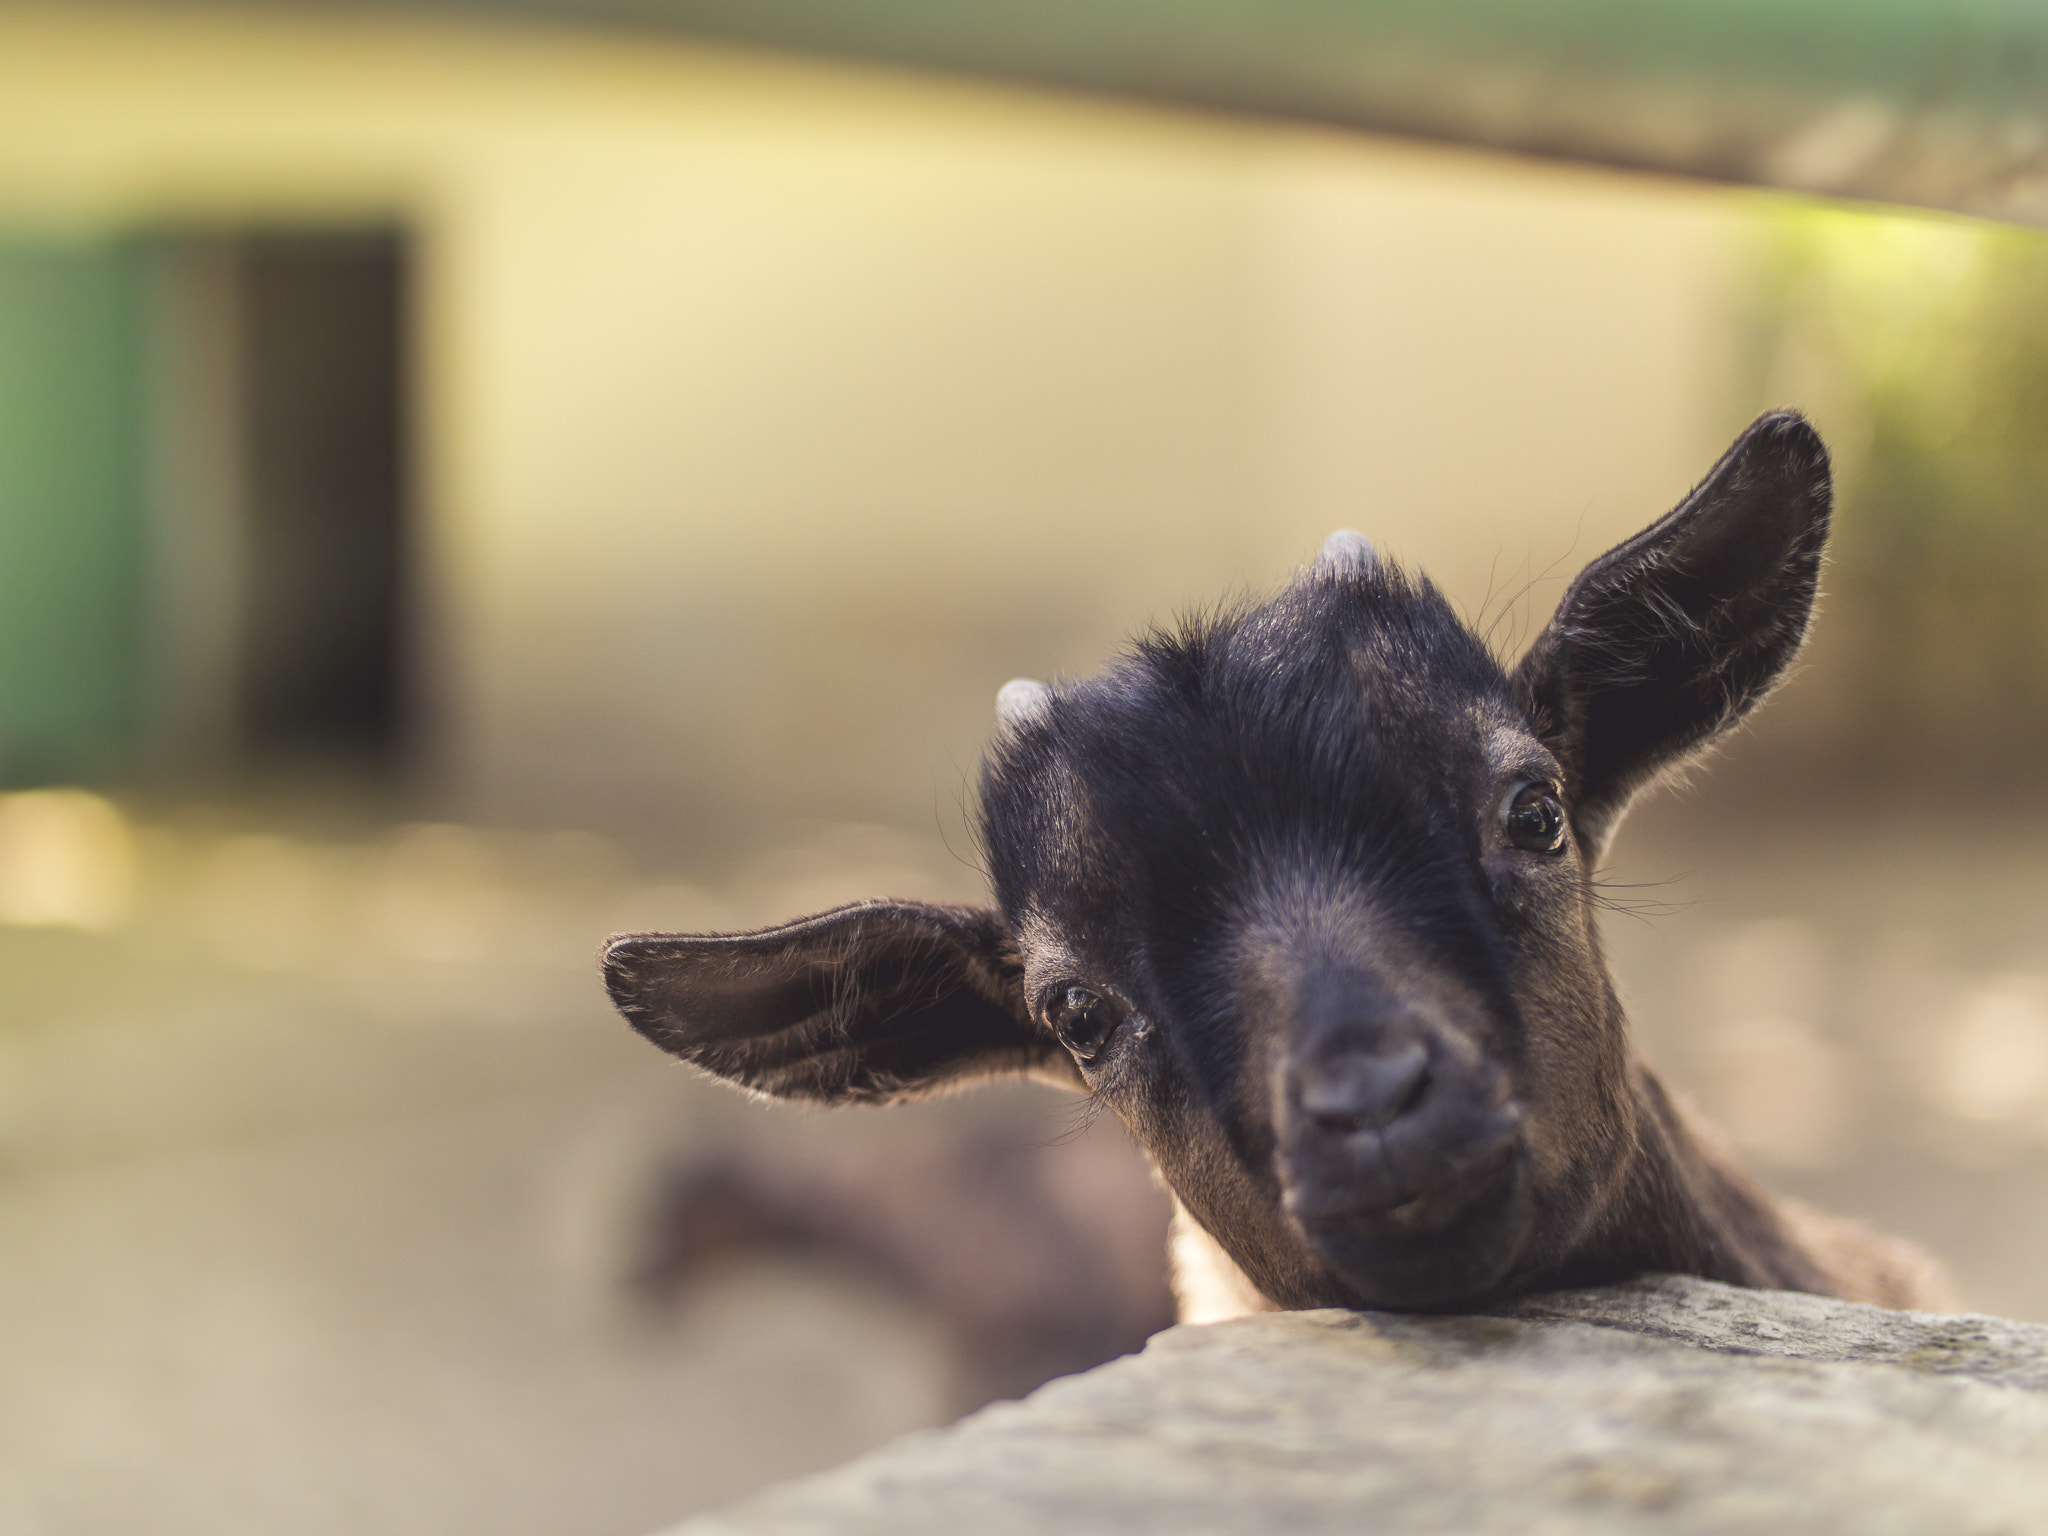 NX 45mm F1.8 [T6] 2D/3D sample photo. Have a goaty day! :-) photography